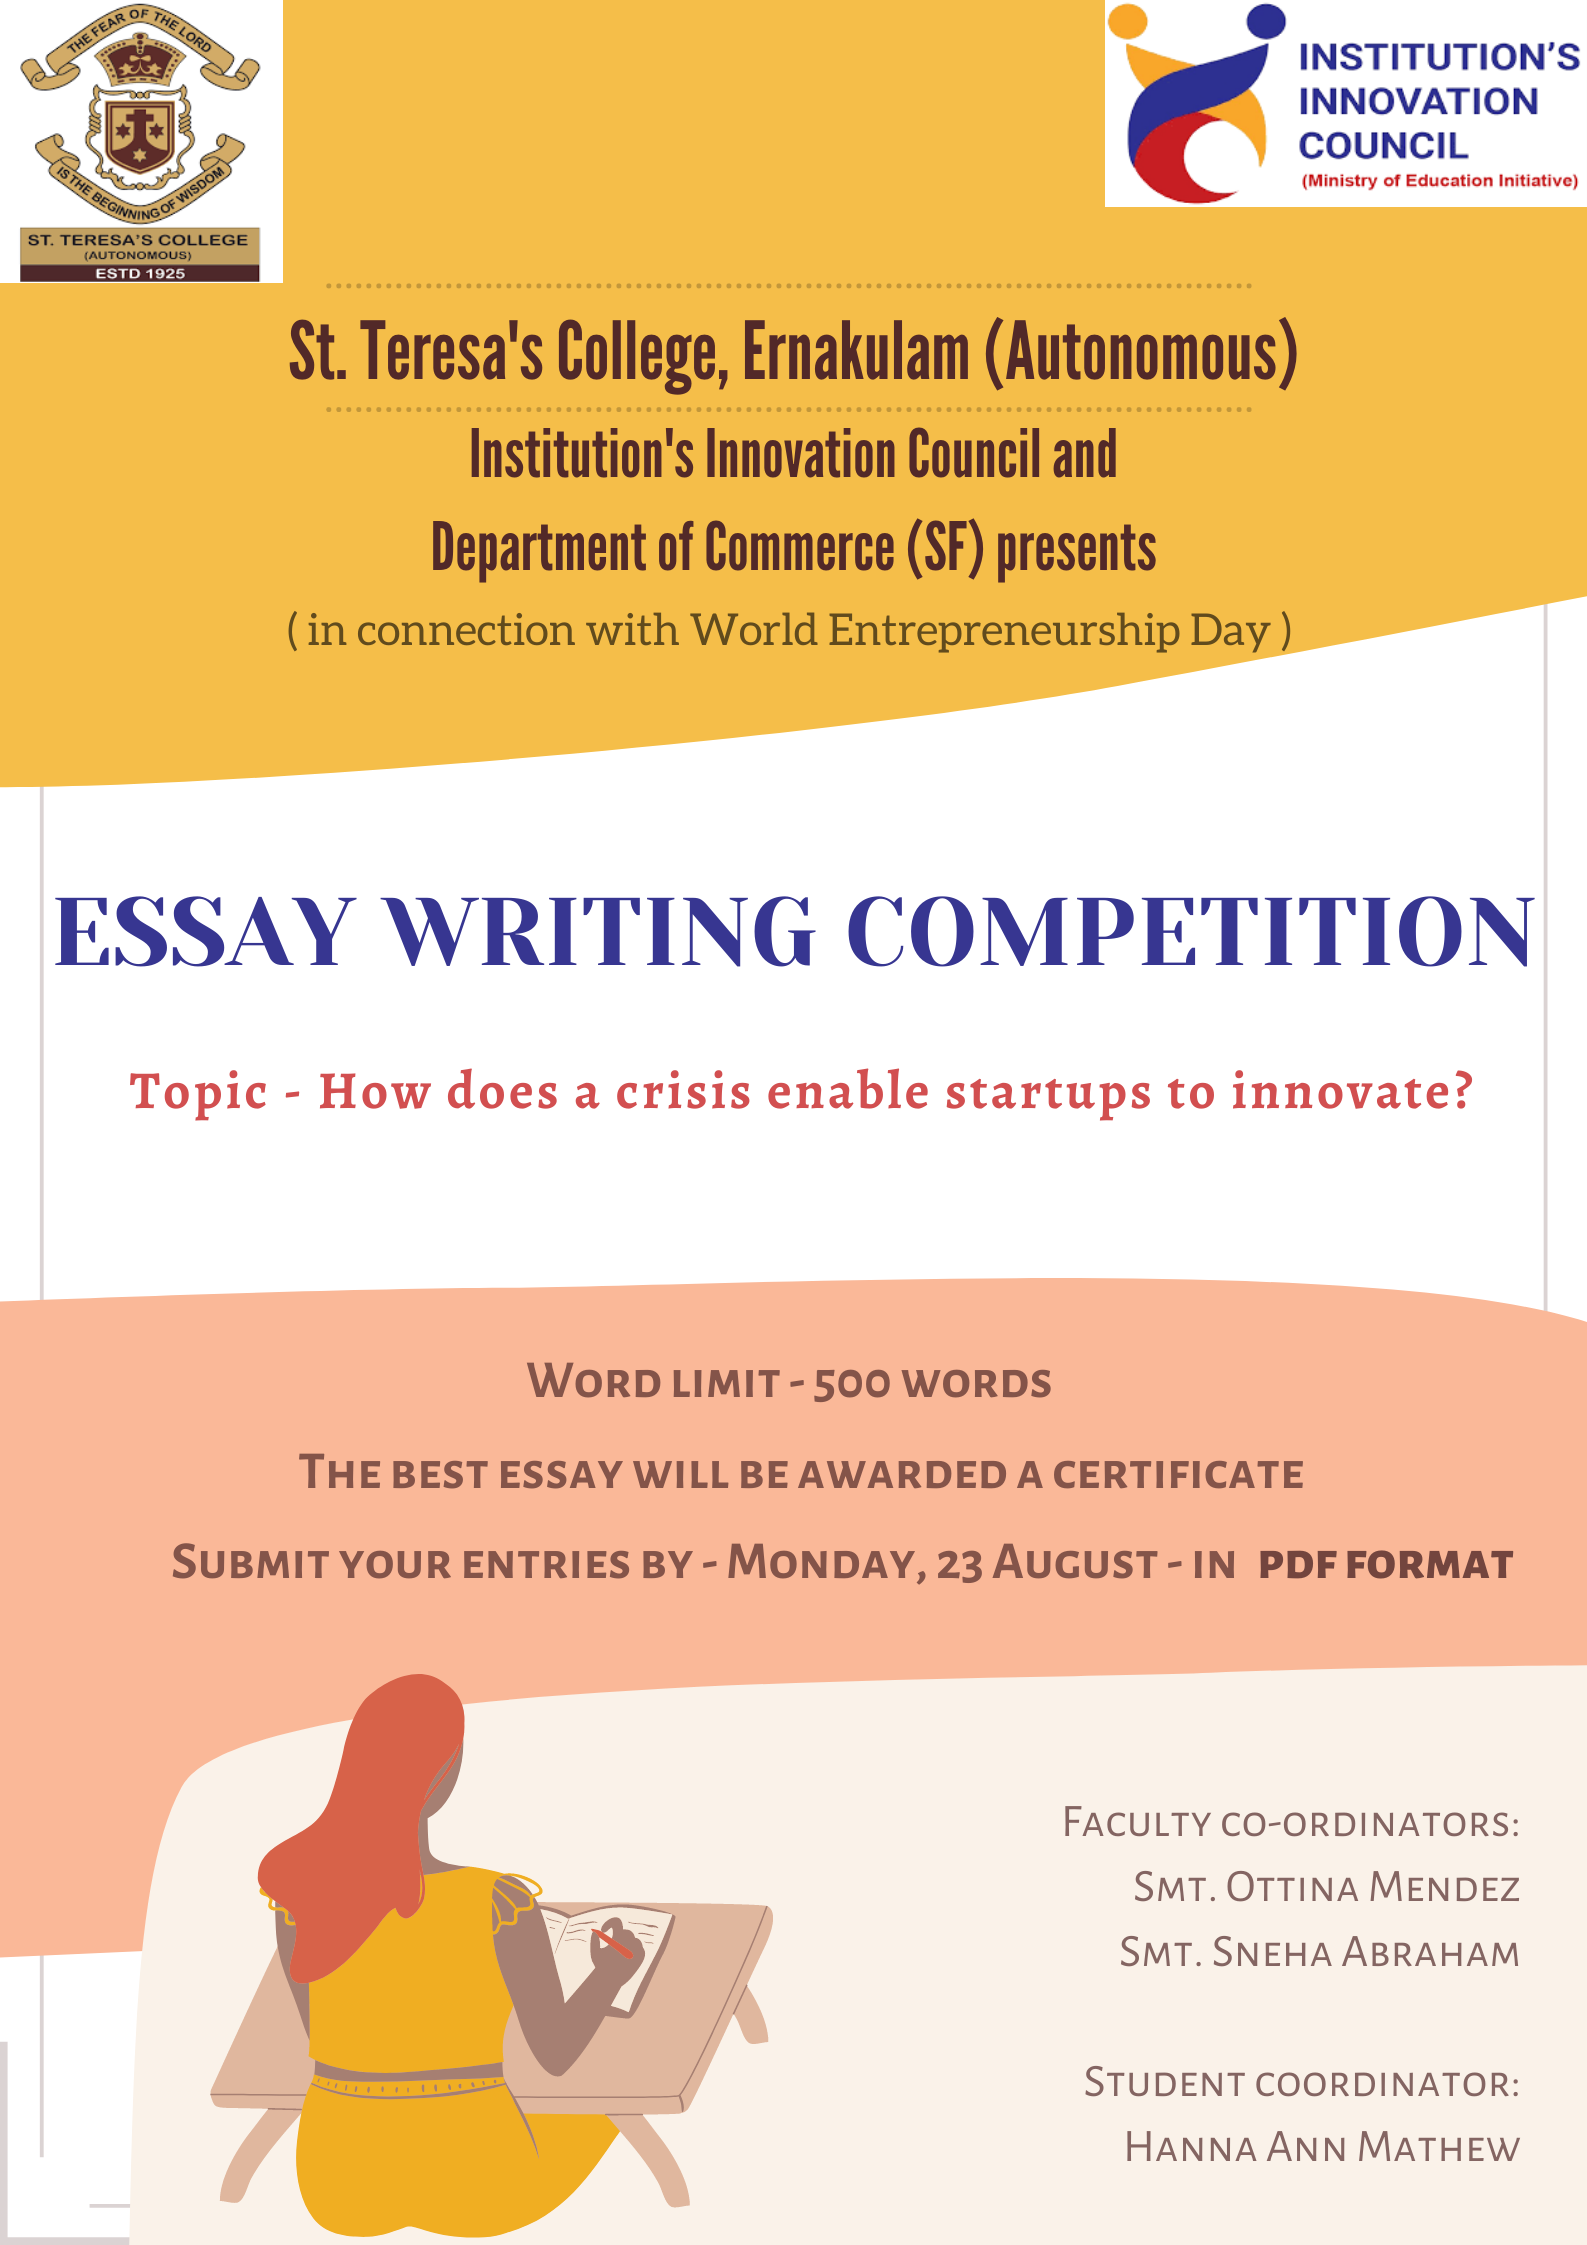 general rules for essay writing competition